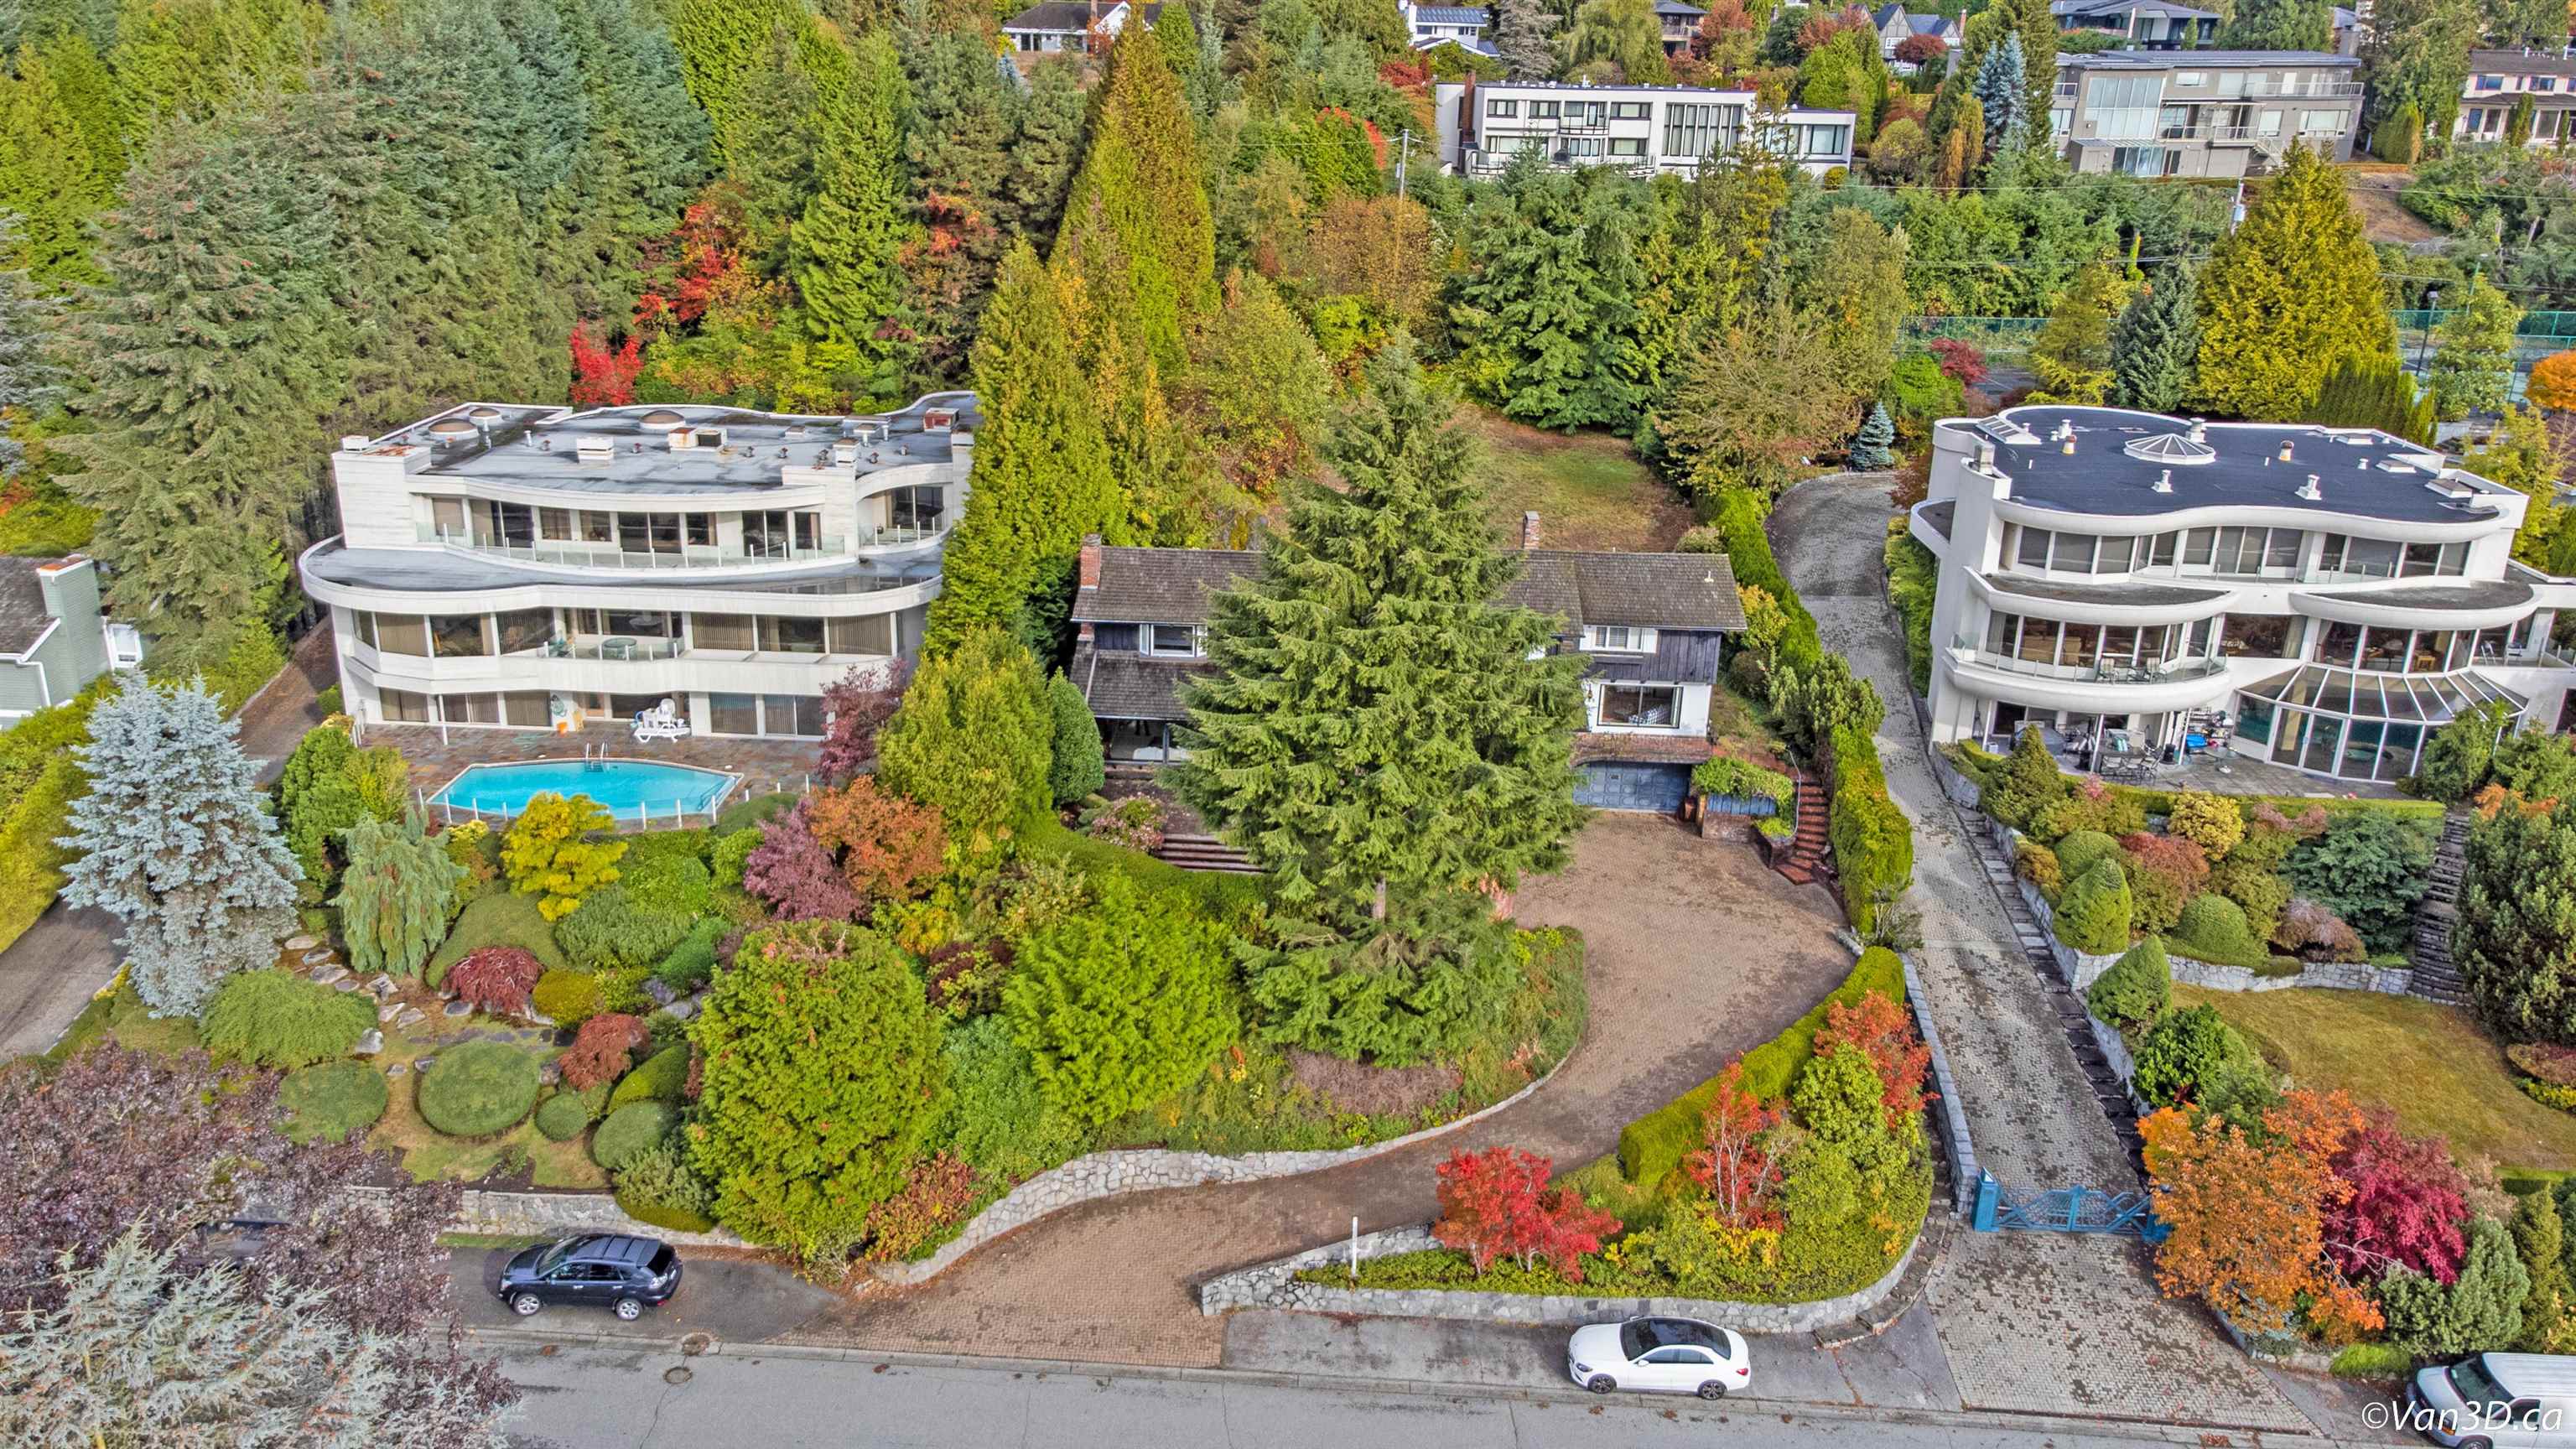 Listing image of 985 KING GEORGES WAY